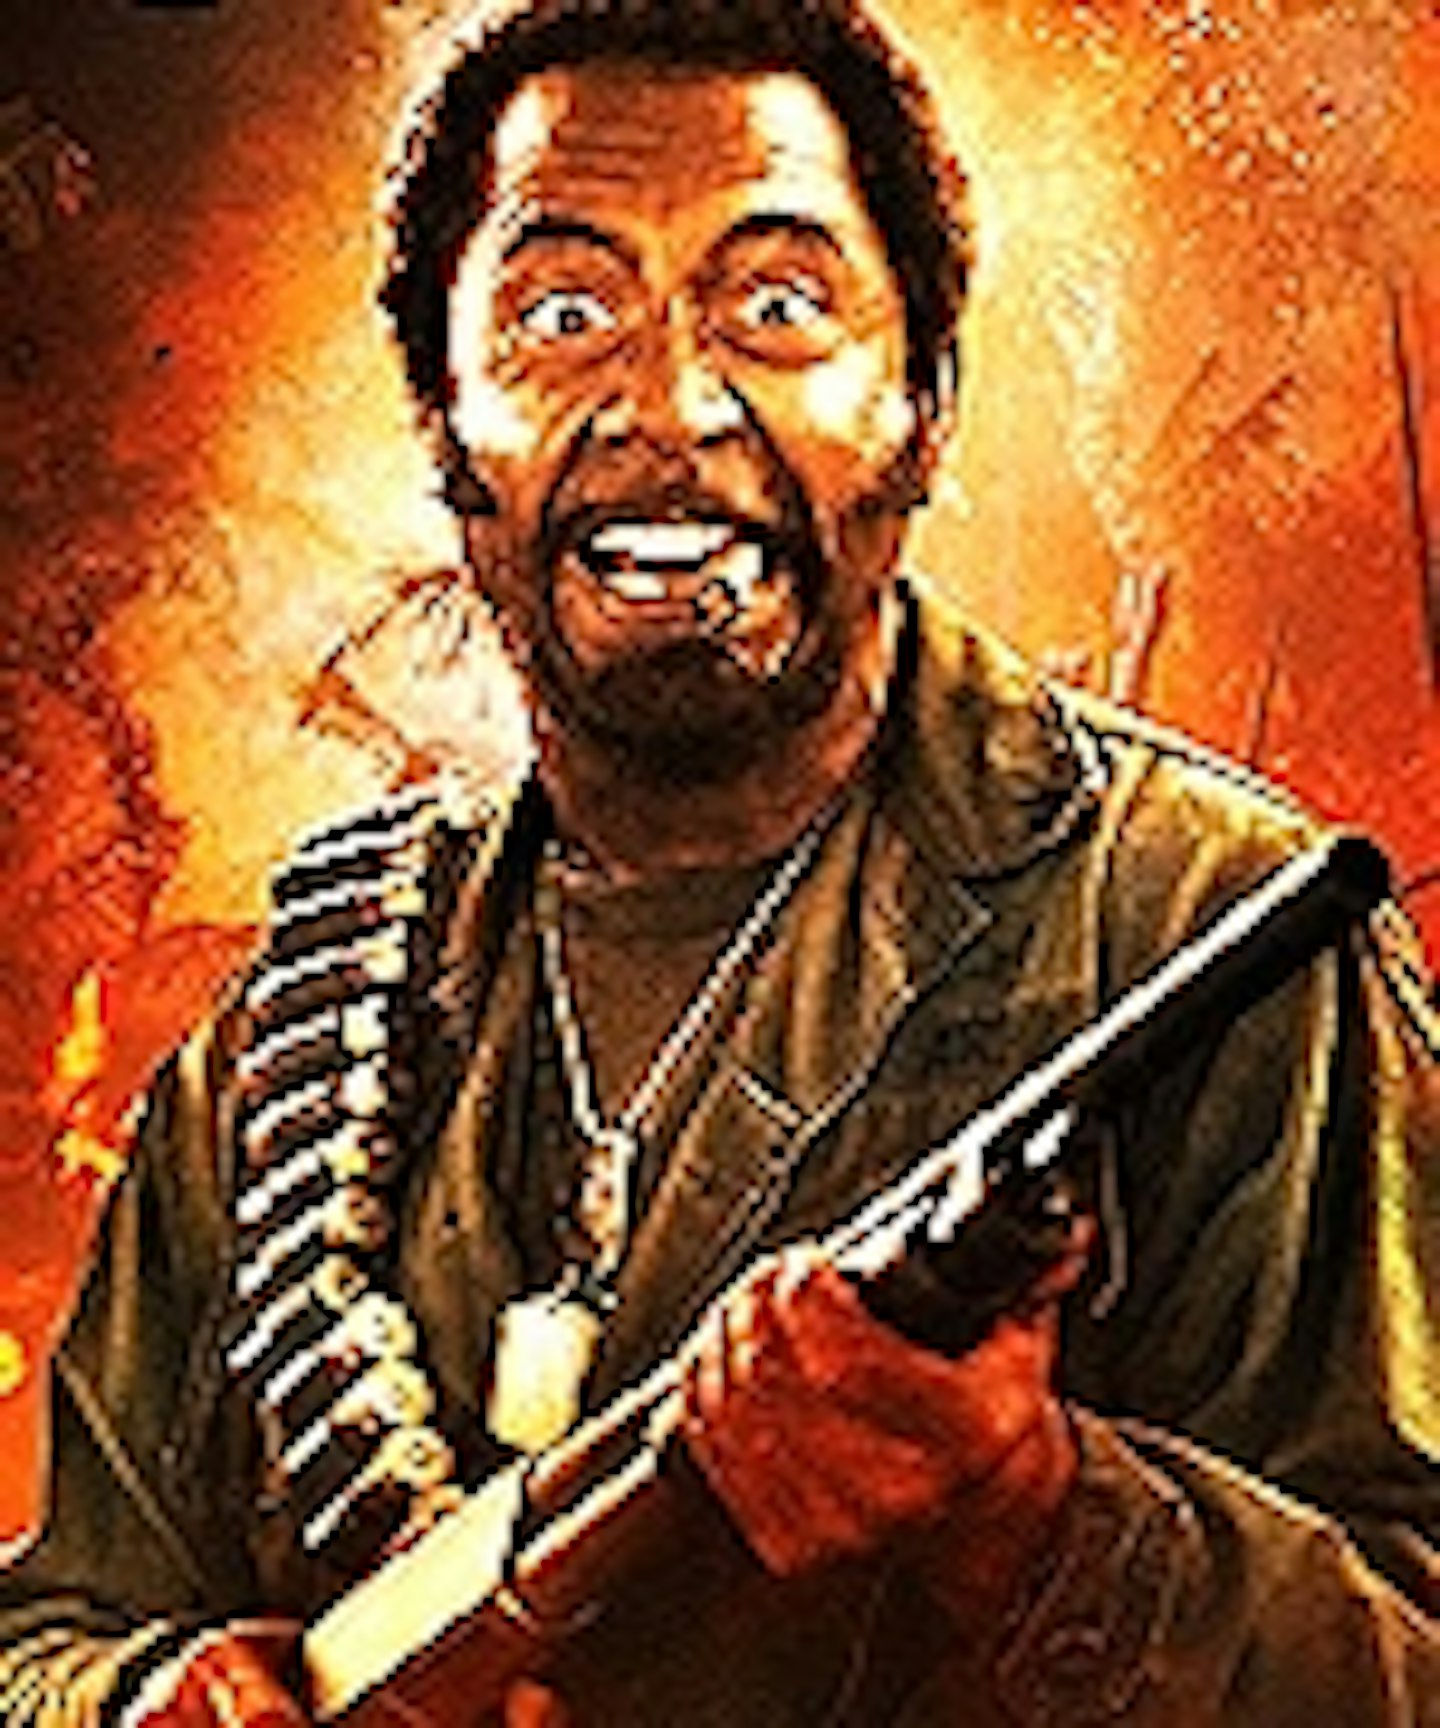 Tropic Thunder Red Band Trailer